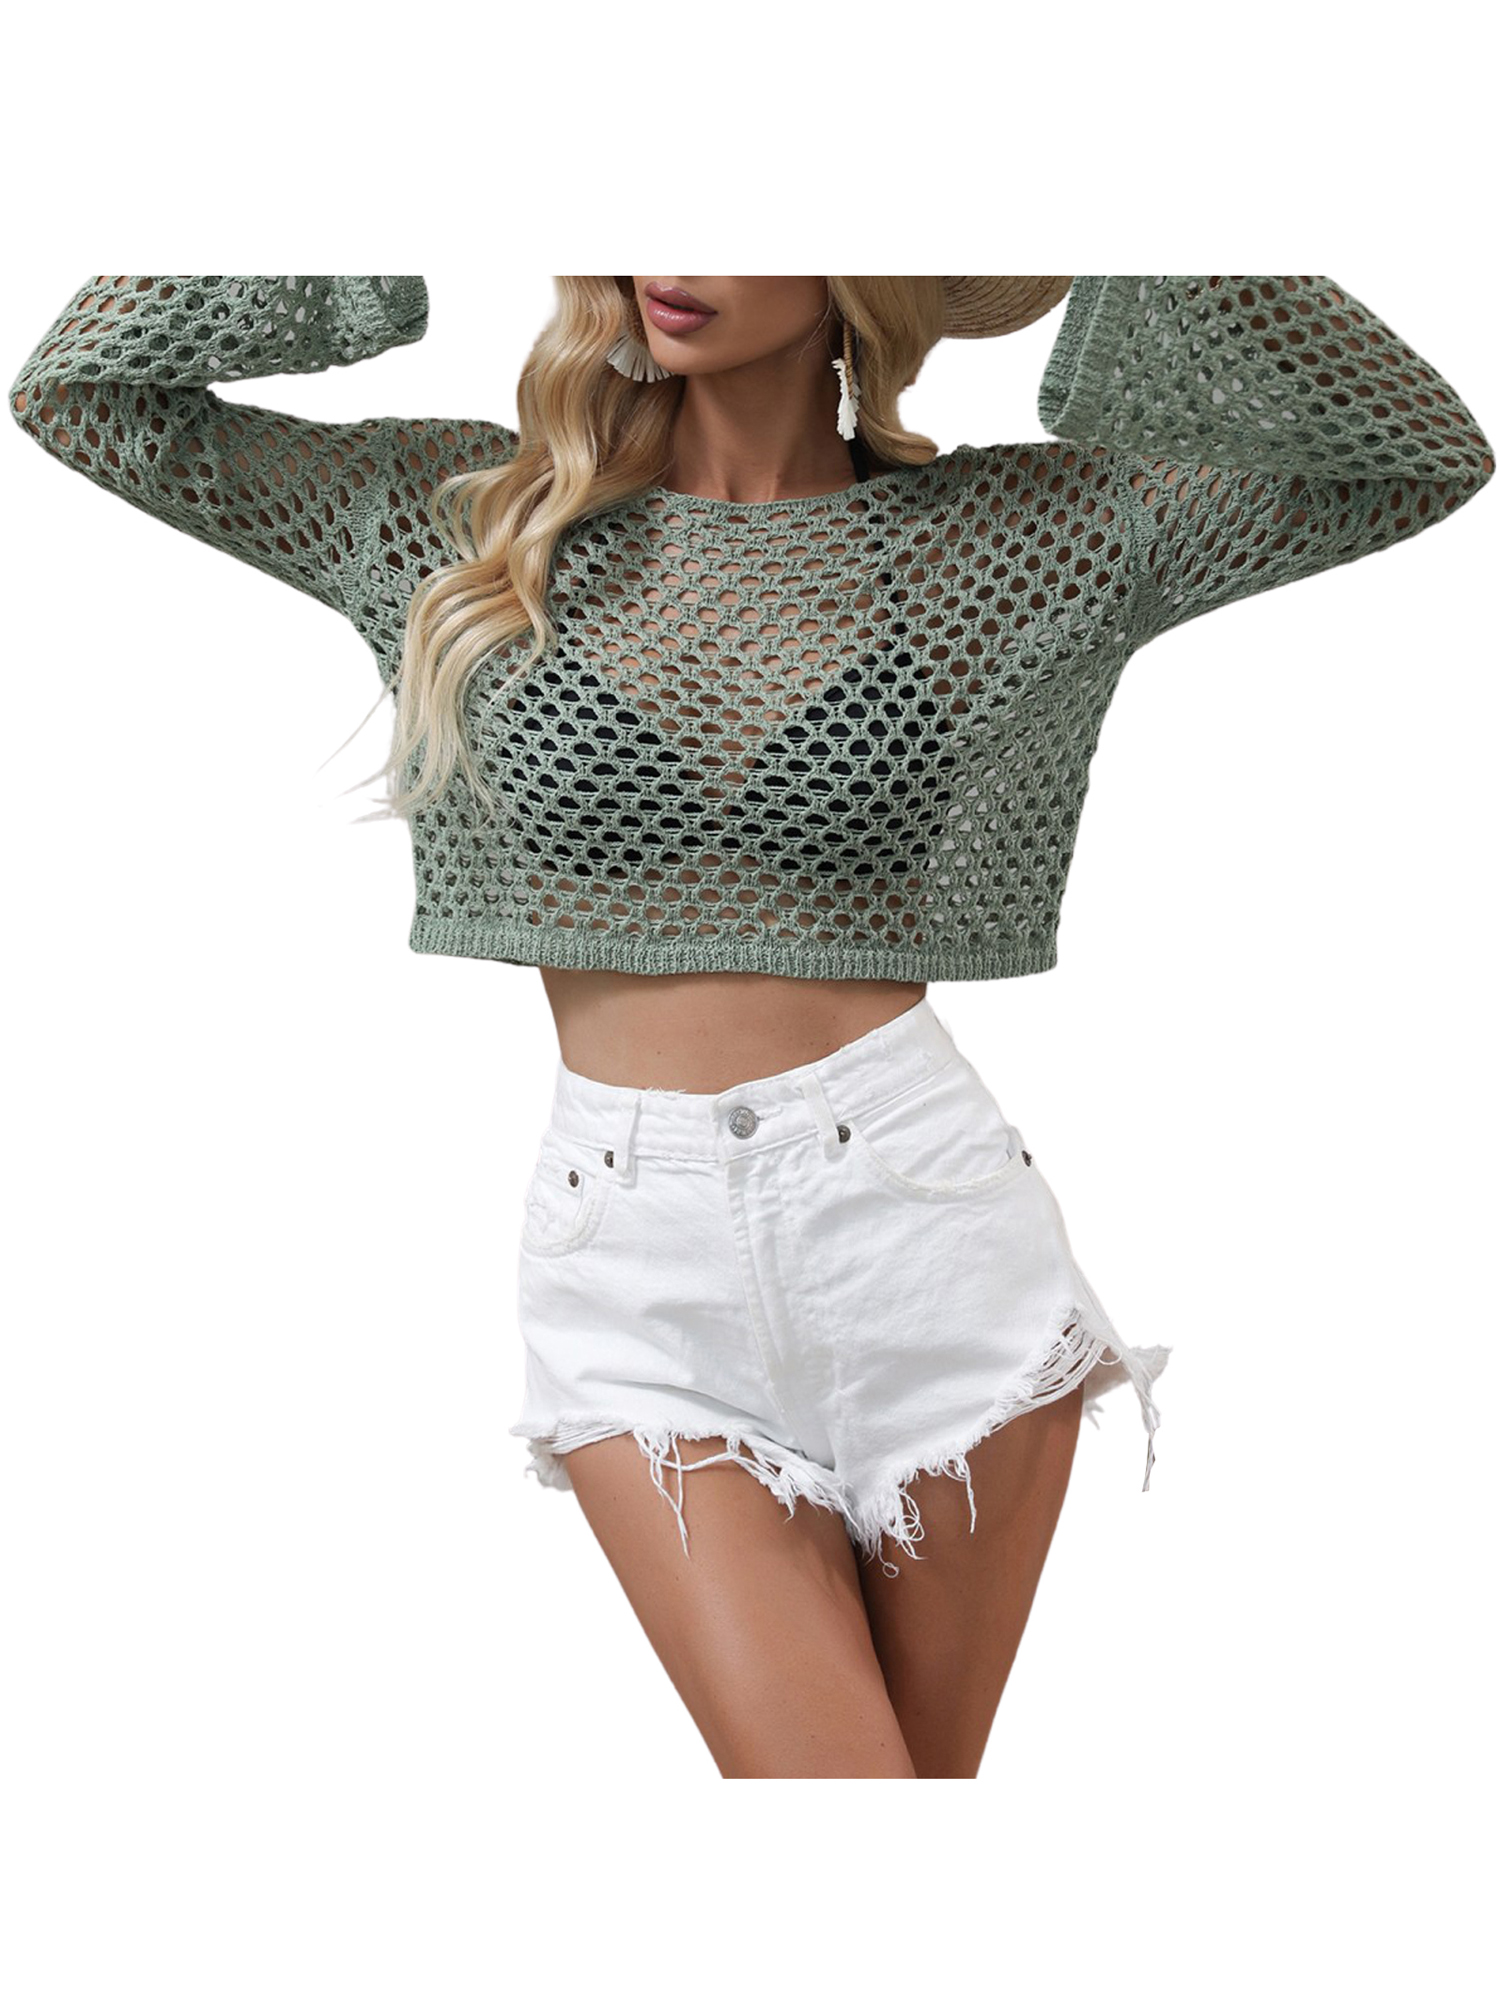 Licupiee Women Sexy Crochet Hollow Out Crop Top Mesh See-Through Long Sleeve Shirt Knitted Pullover Cover Up Tee - image 3 of 6